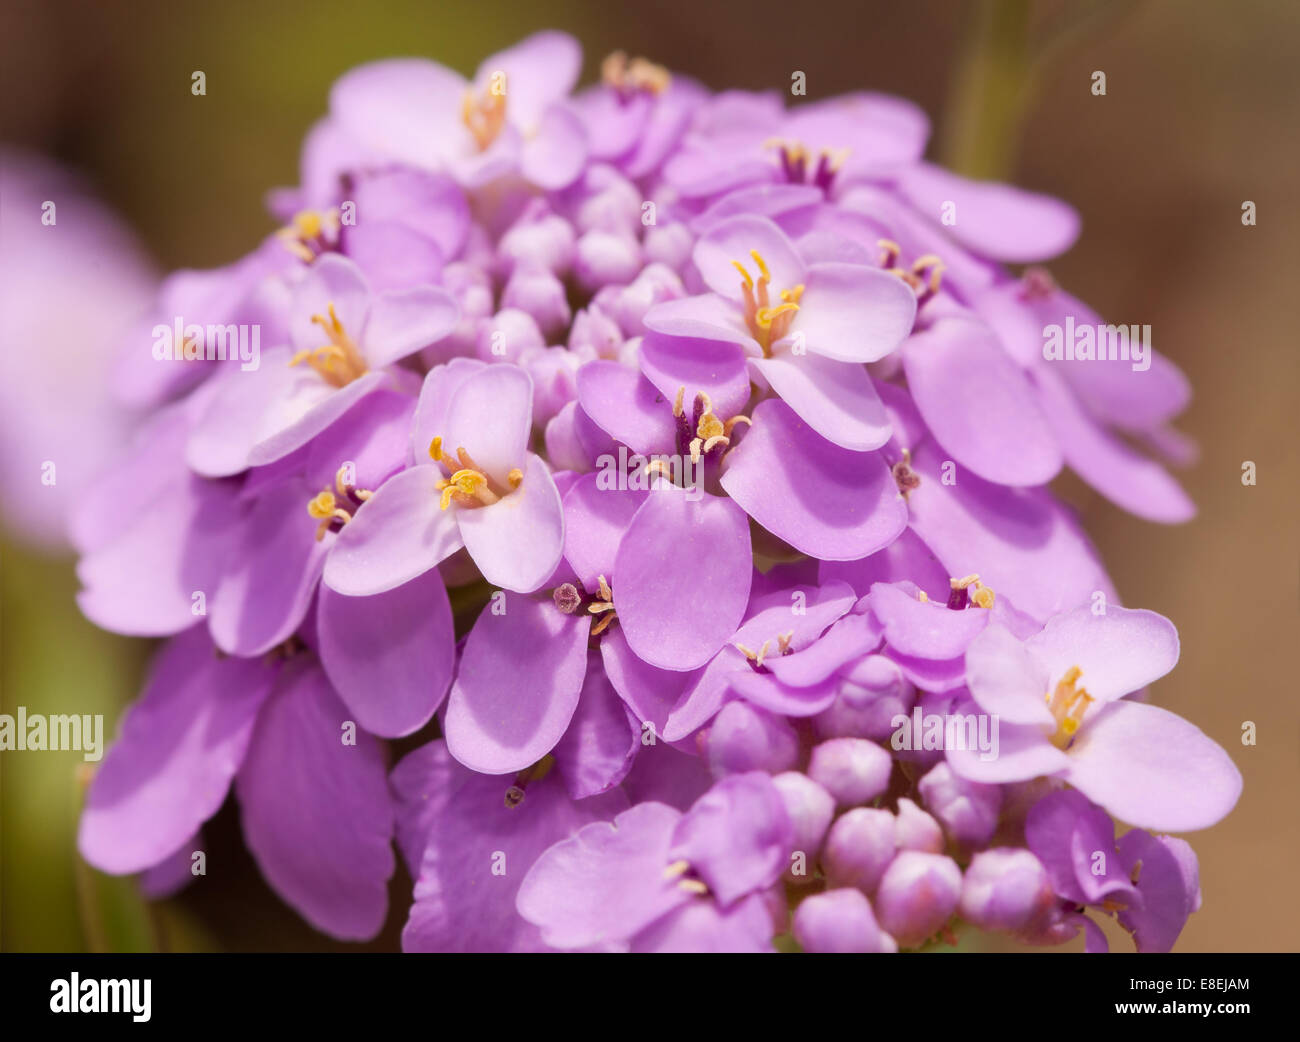 Iberis umbellata, Candytuft flower in delicate light purple color Stock Photo